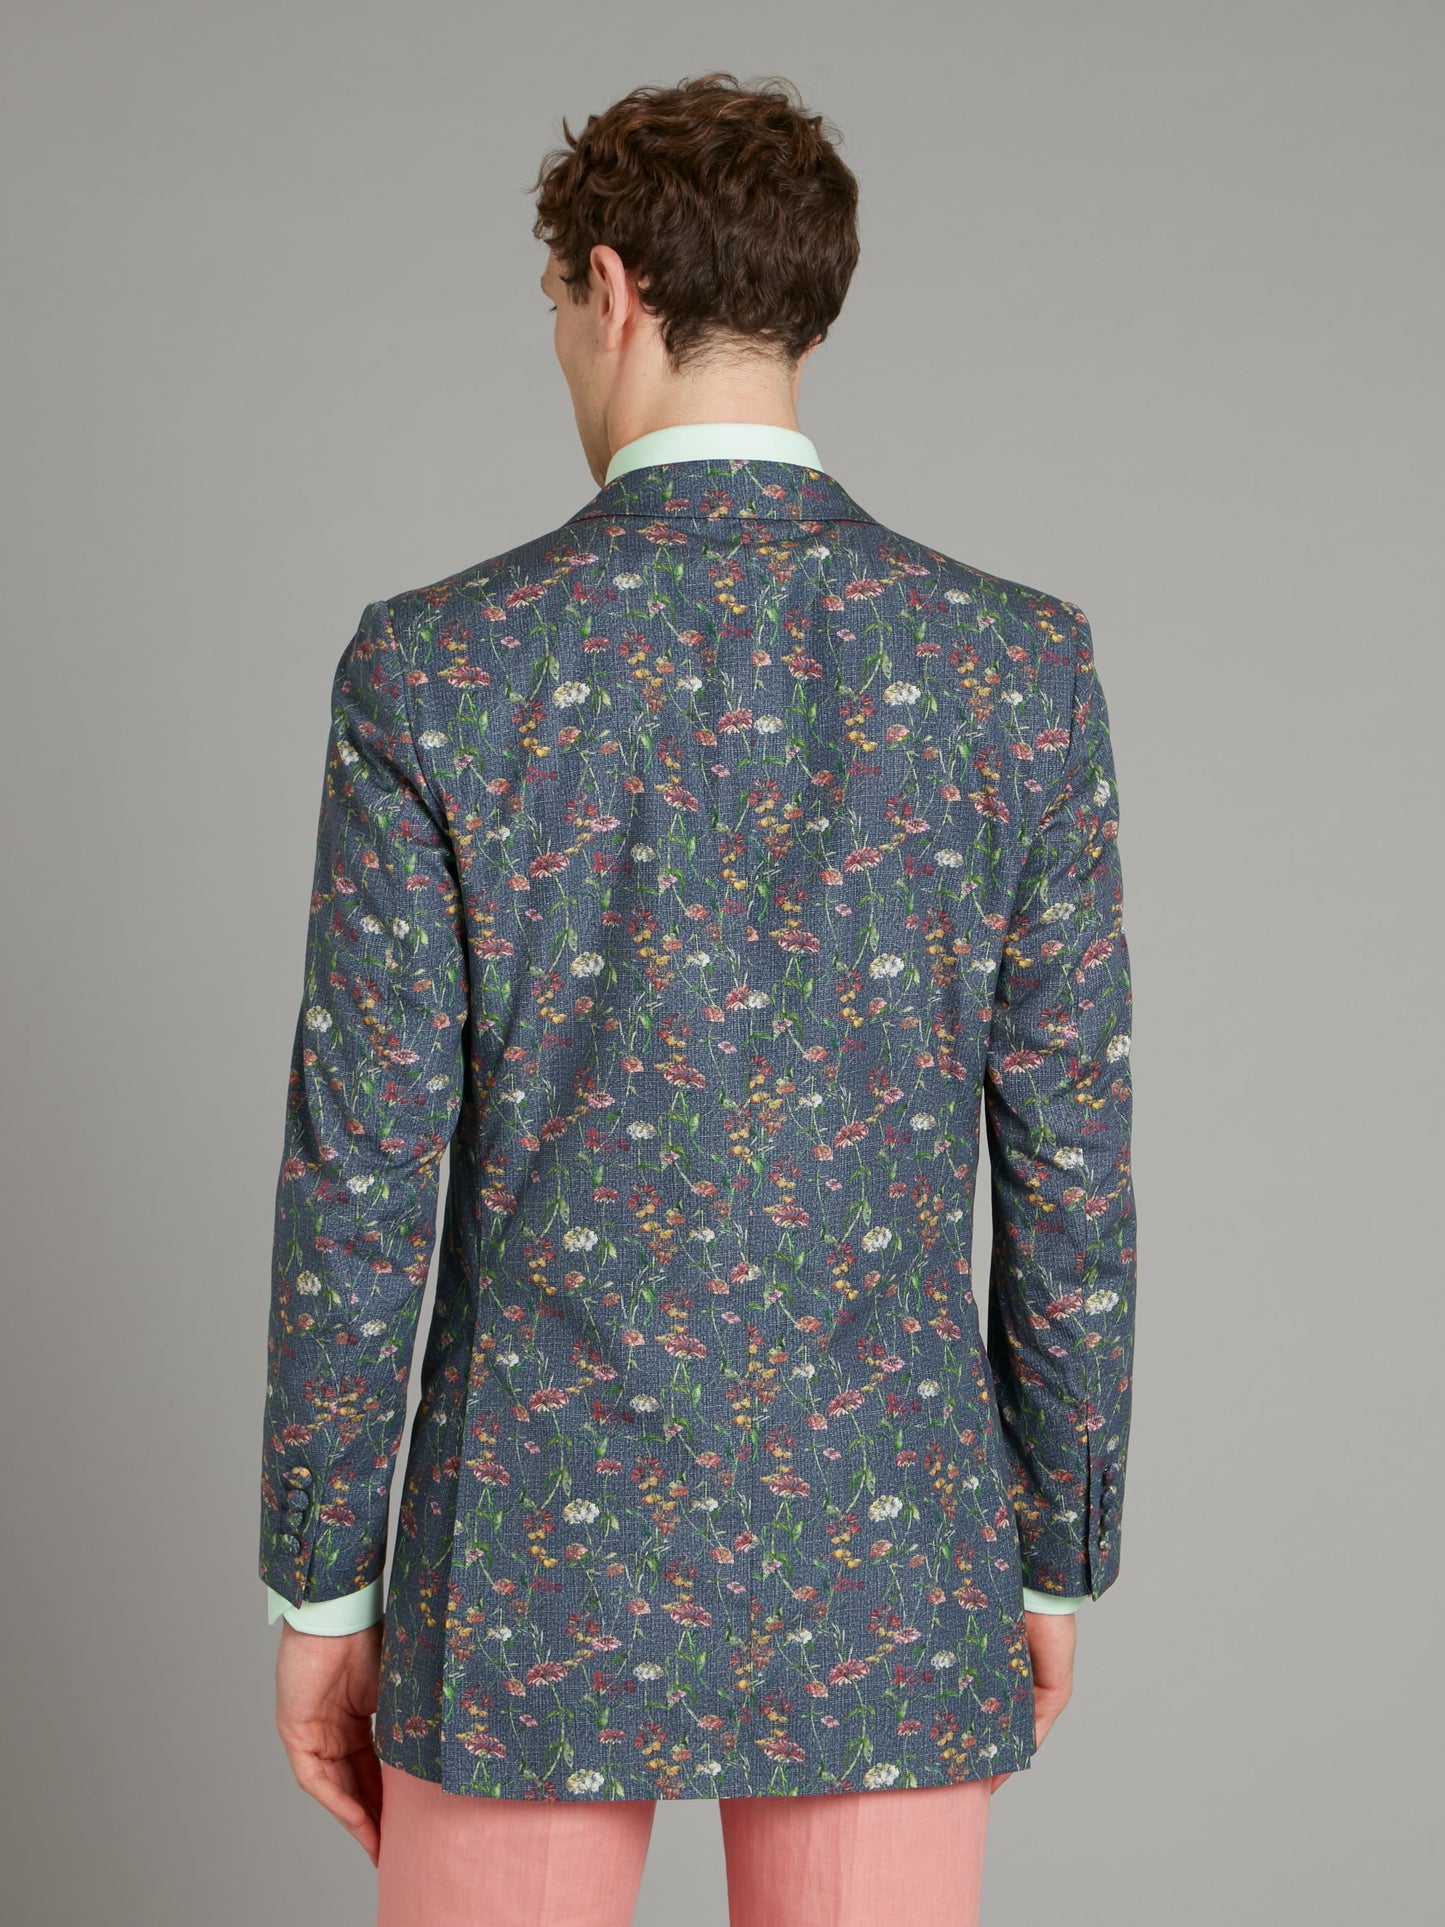 Full Bloom Carlyle Cocktail Jacket - Navy